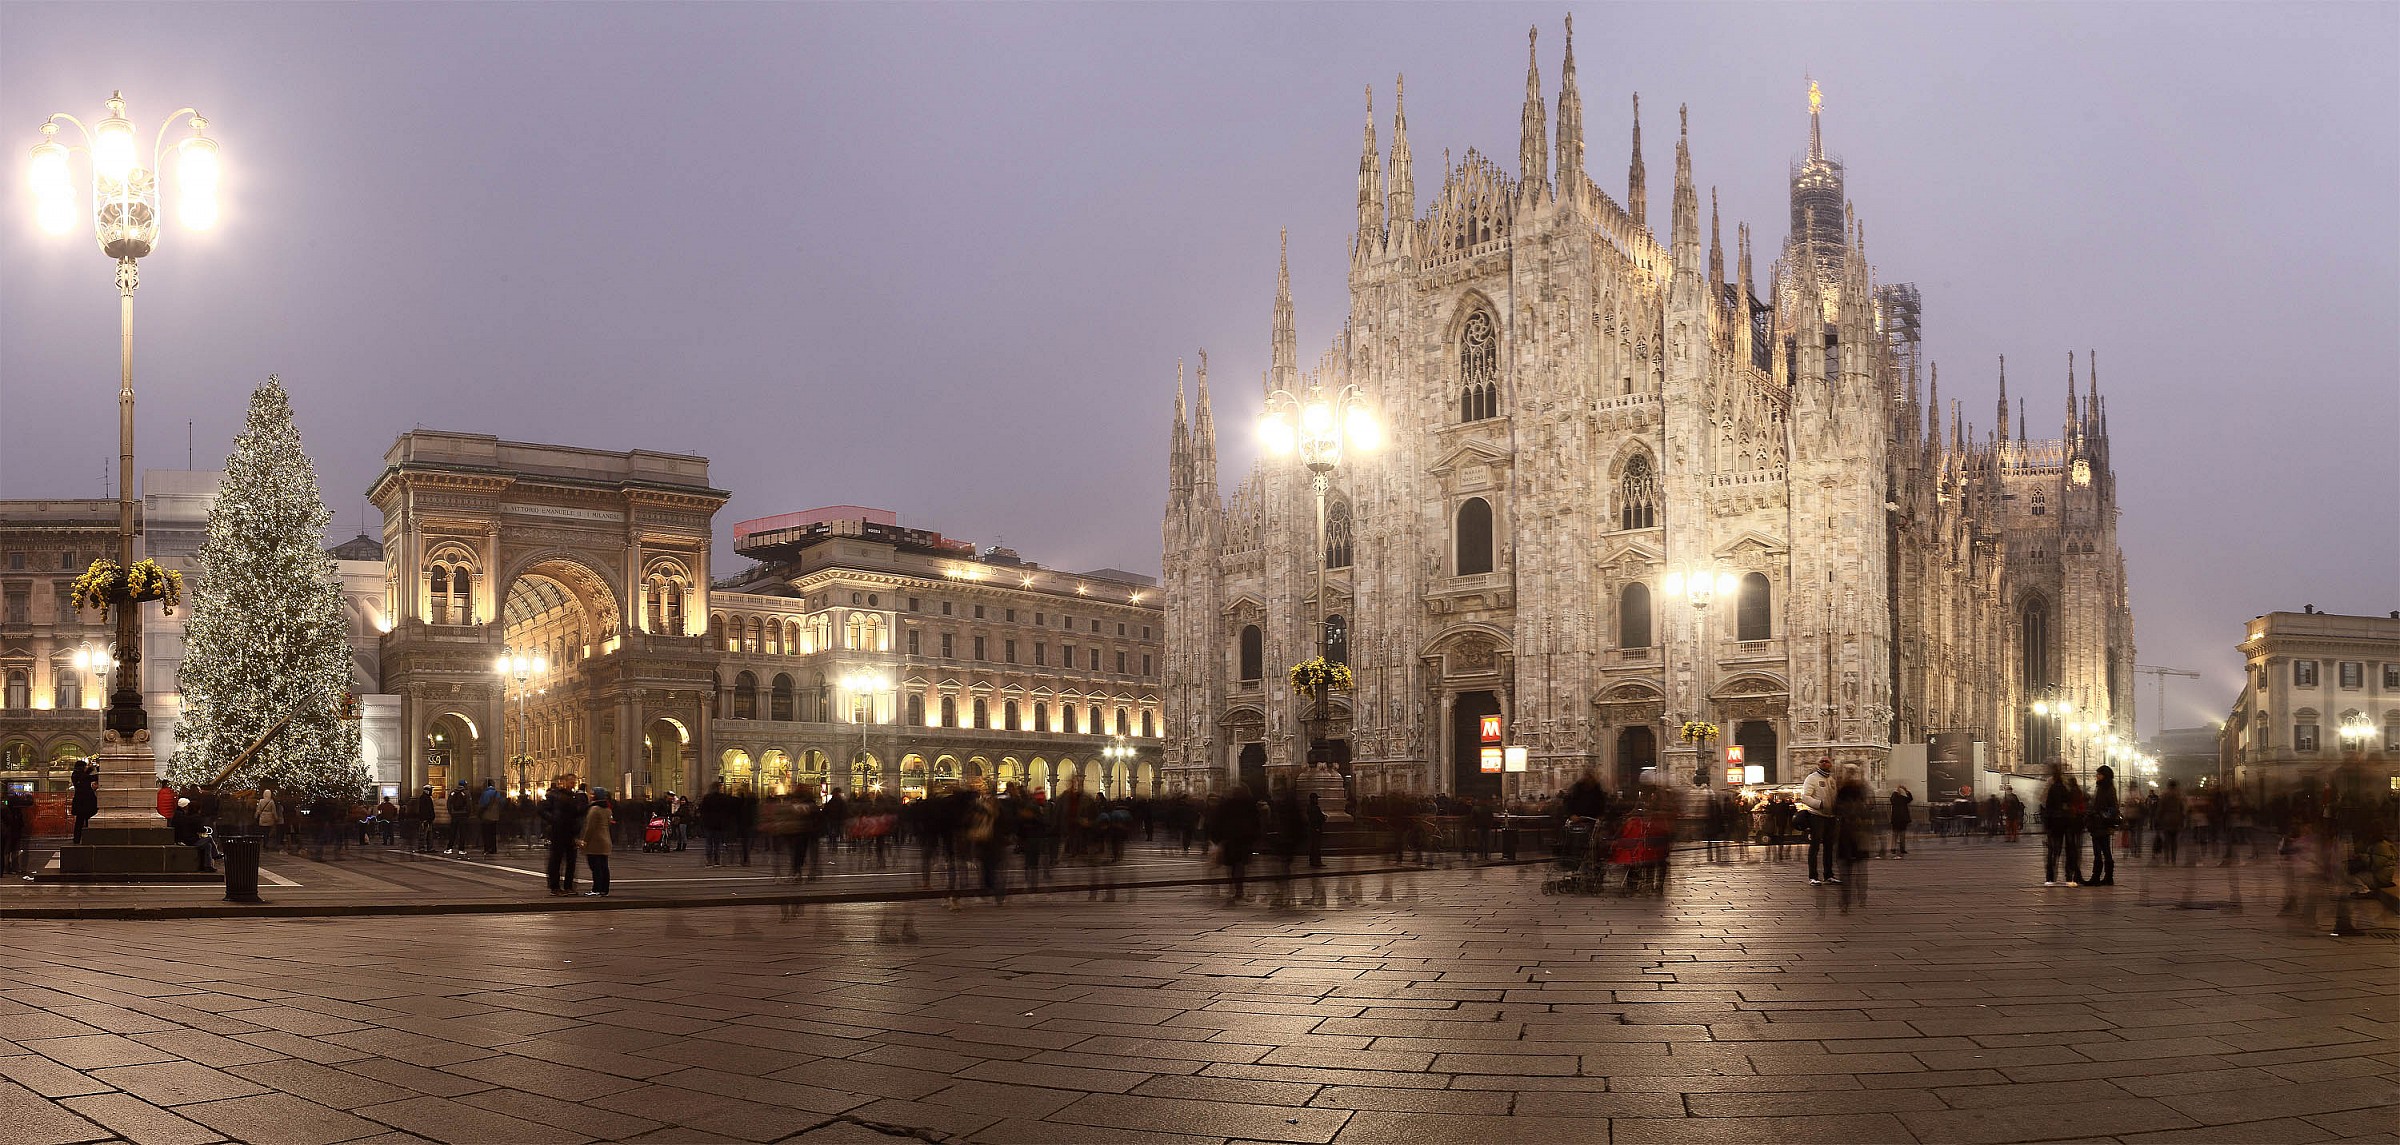 Overview - Piazza Duomo Milan...